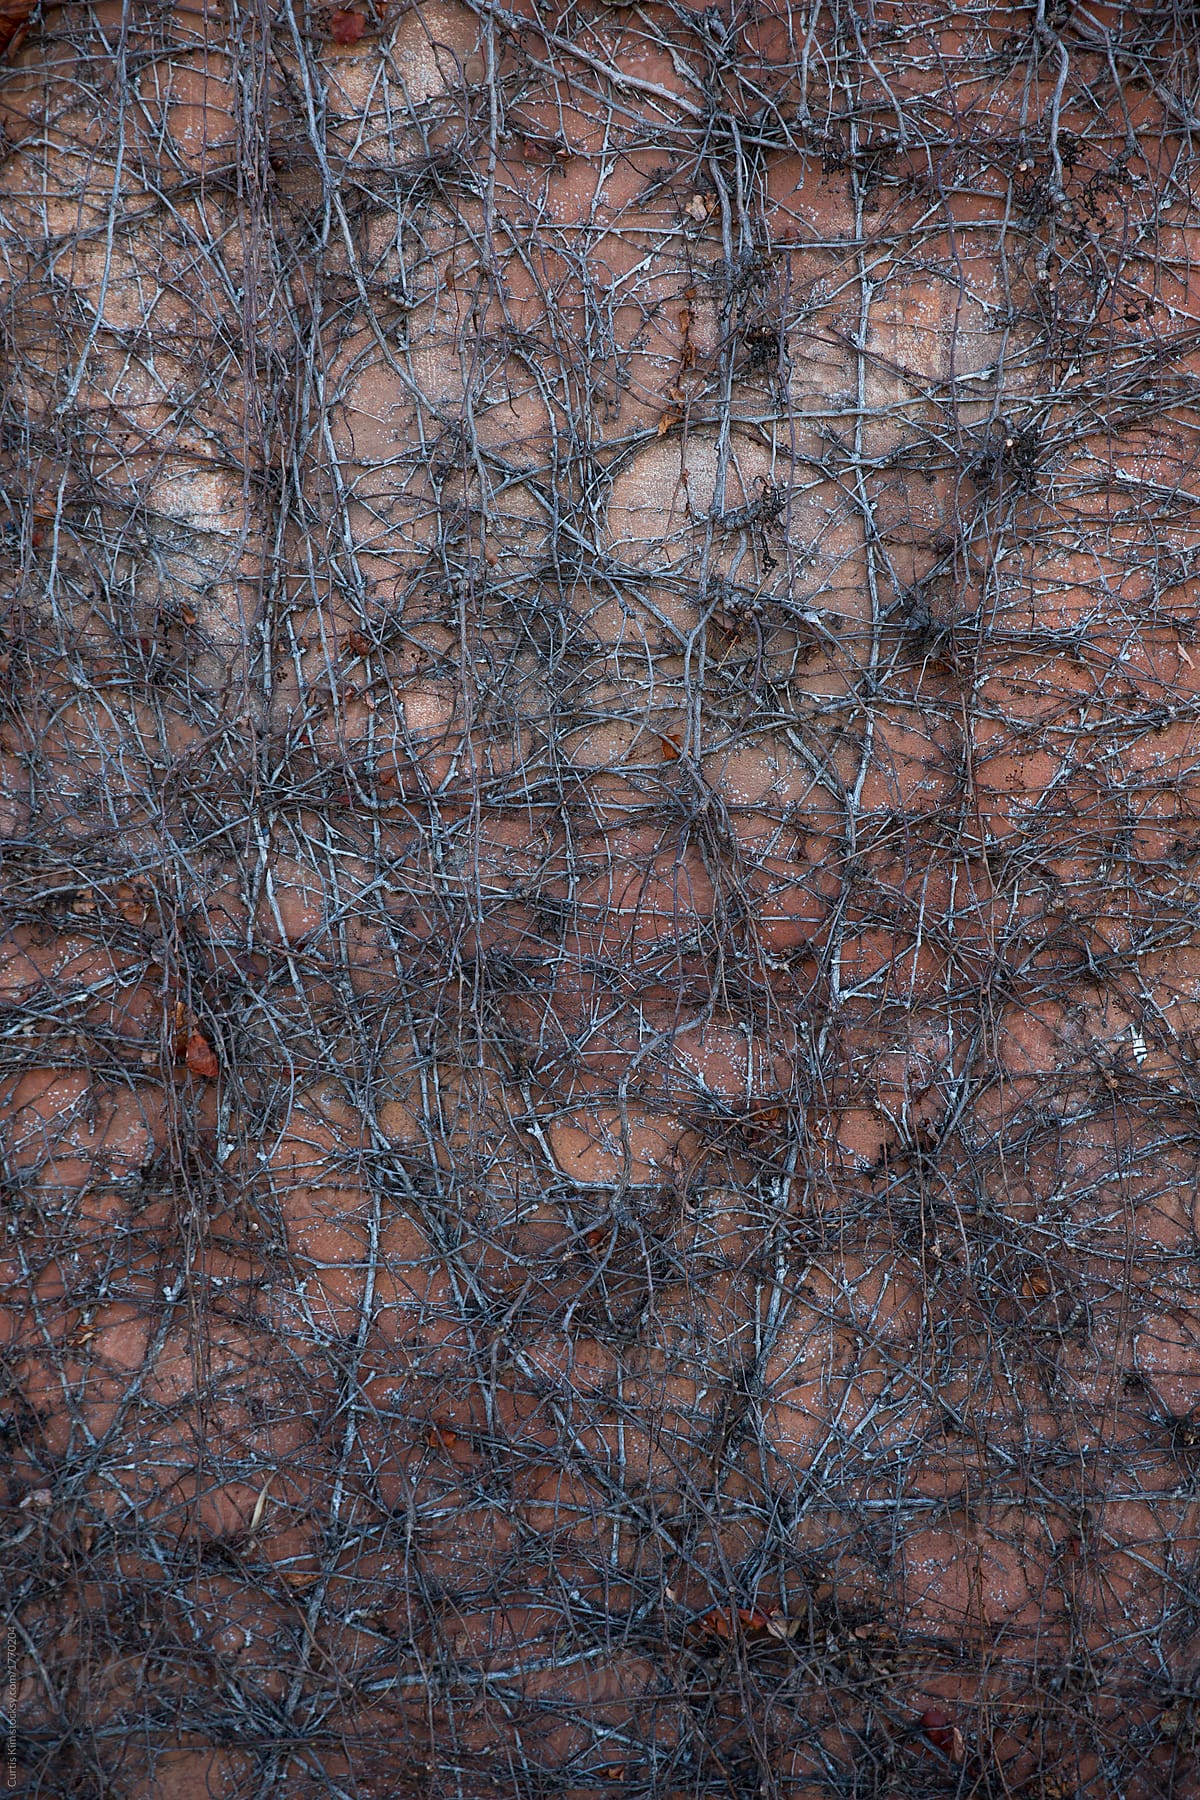 Cool texture of vines growing on wall